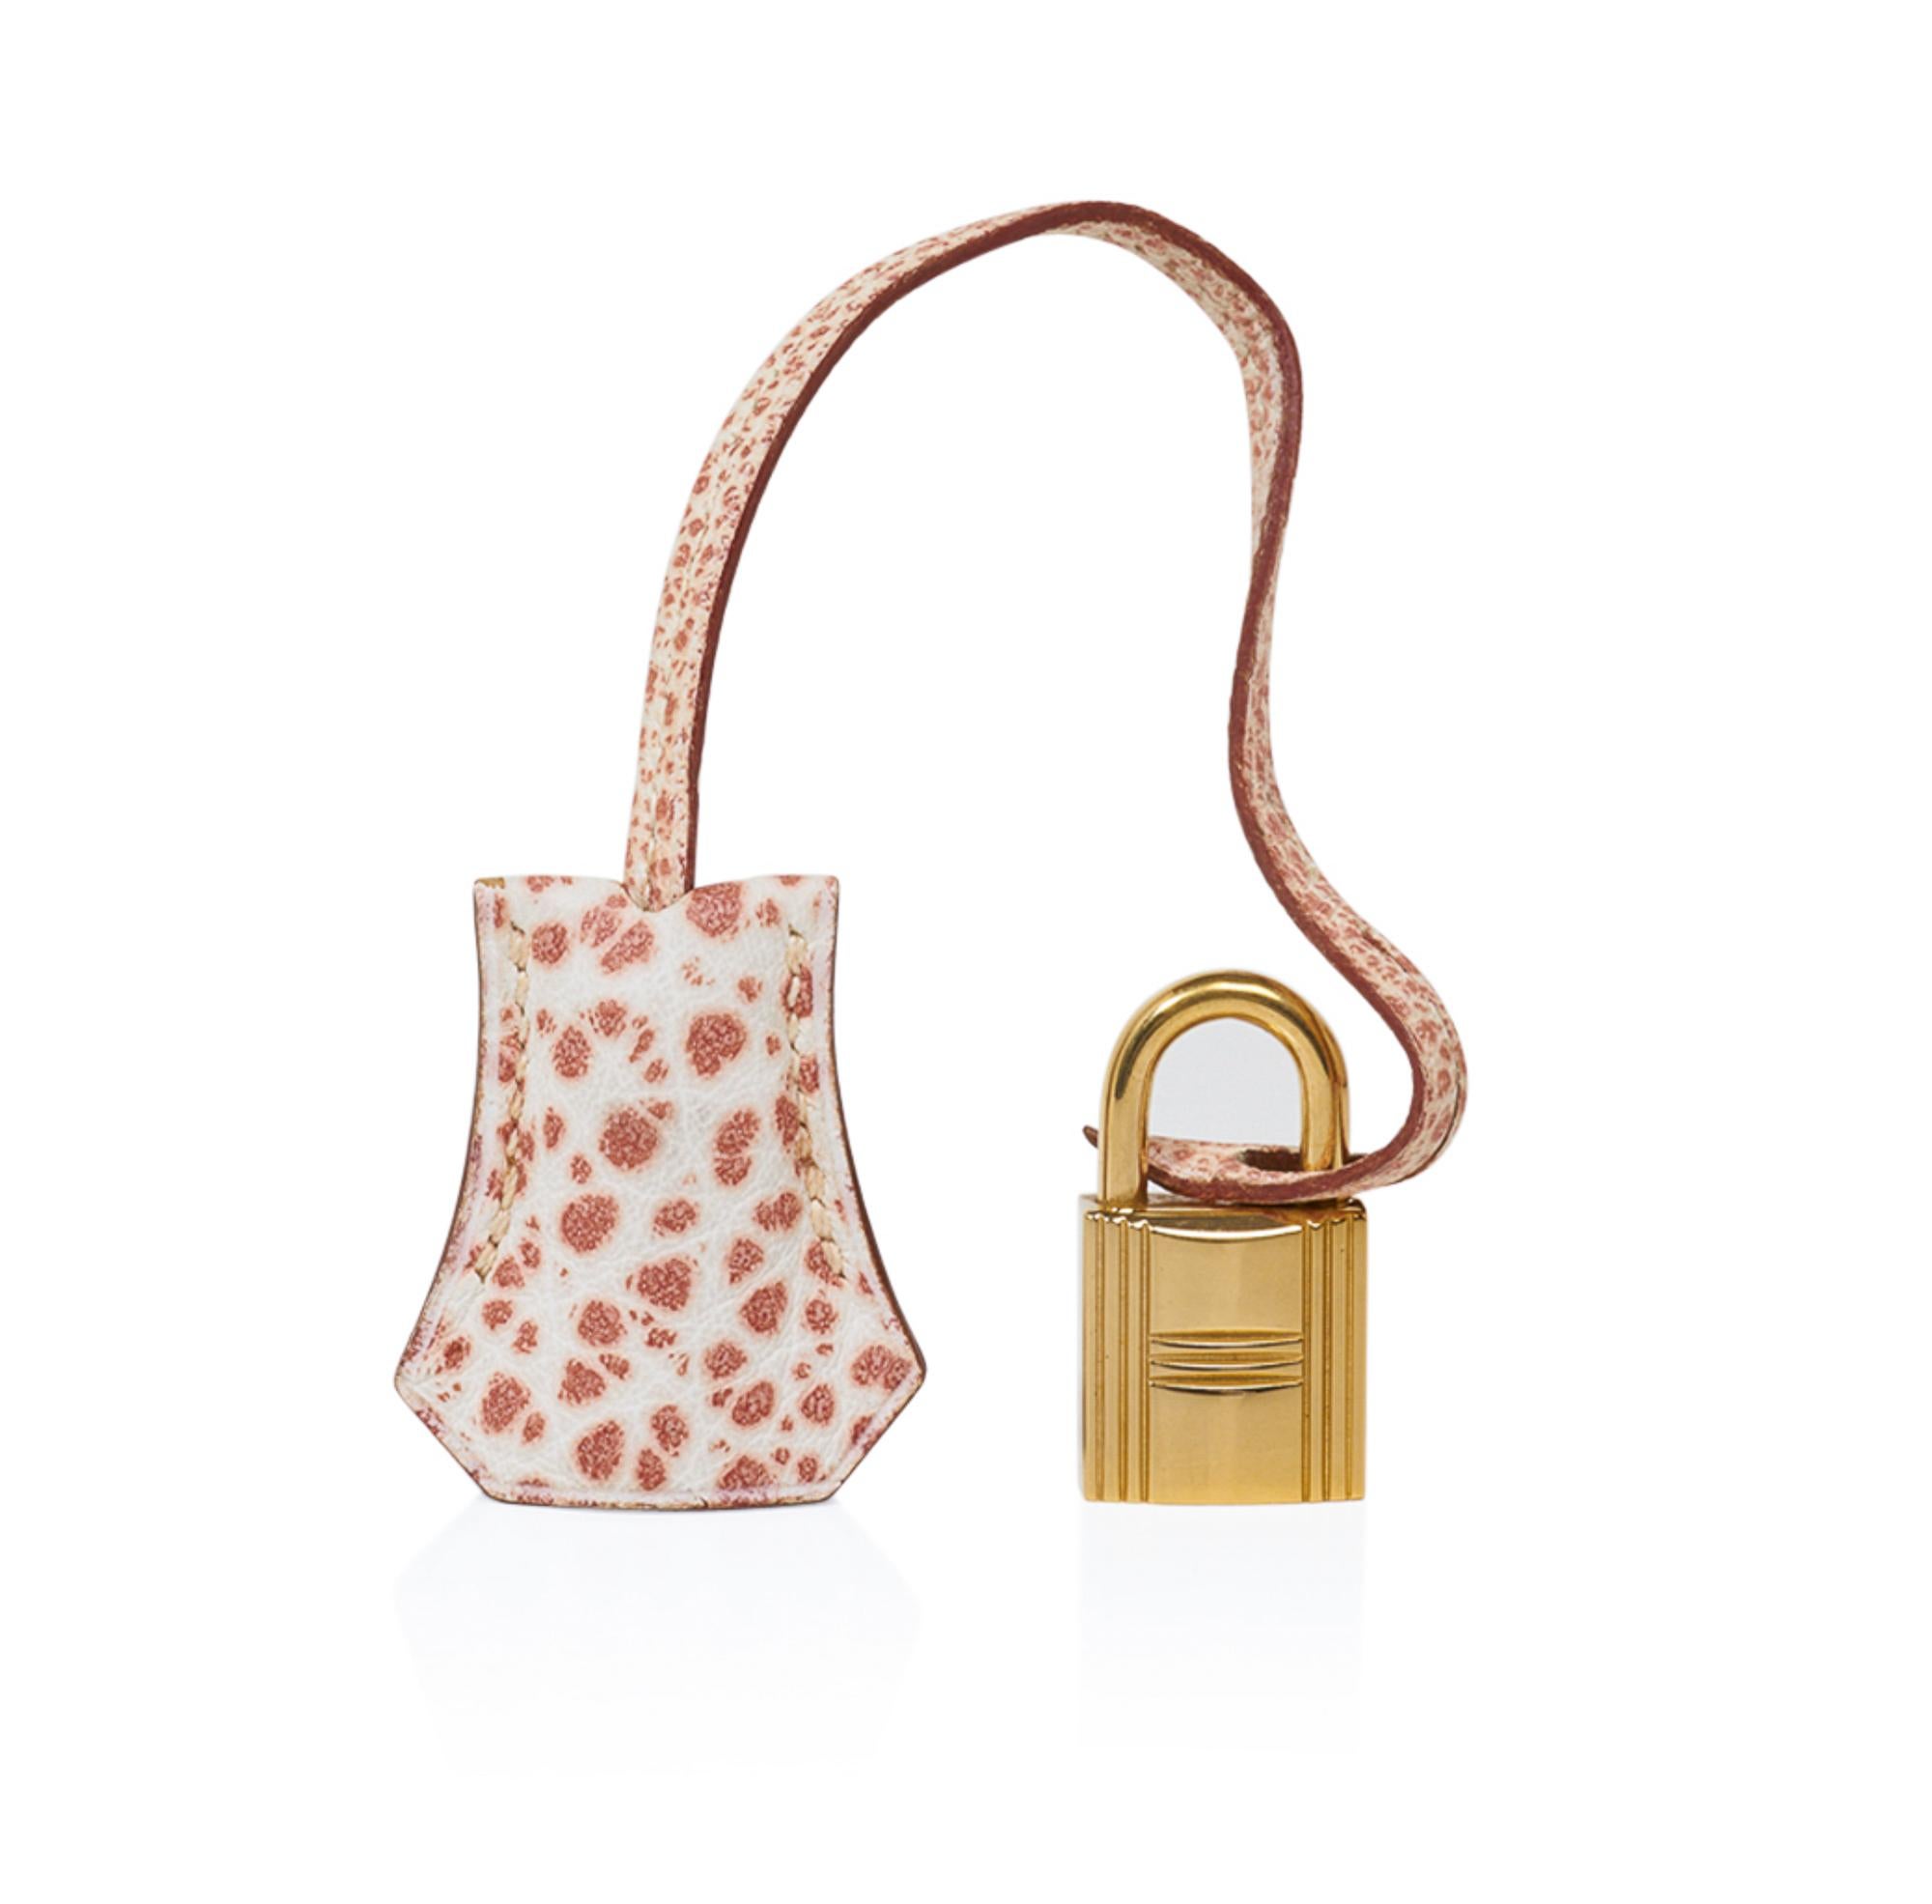 Guaranteed authentic Hermes Kelly 28 bag featured in Pink and White Dalmation Buffalo Skipper leather. 
The exquisite and rare Dalmation Kelly bag was produced in 2008 and only a handful were brought to market in 2010 as it was so difficult to